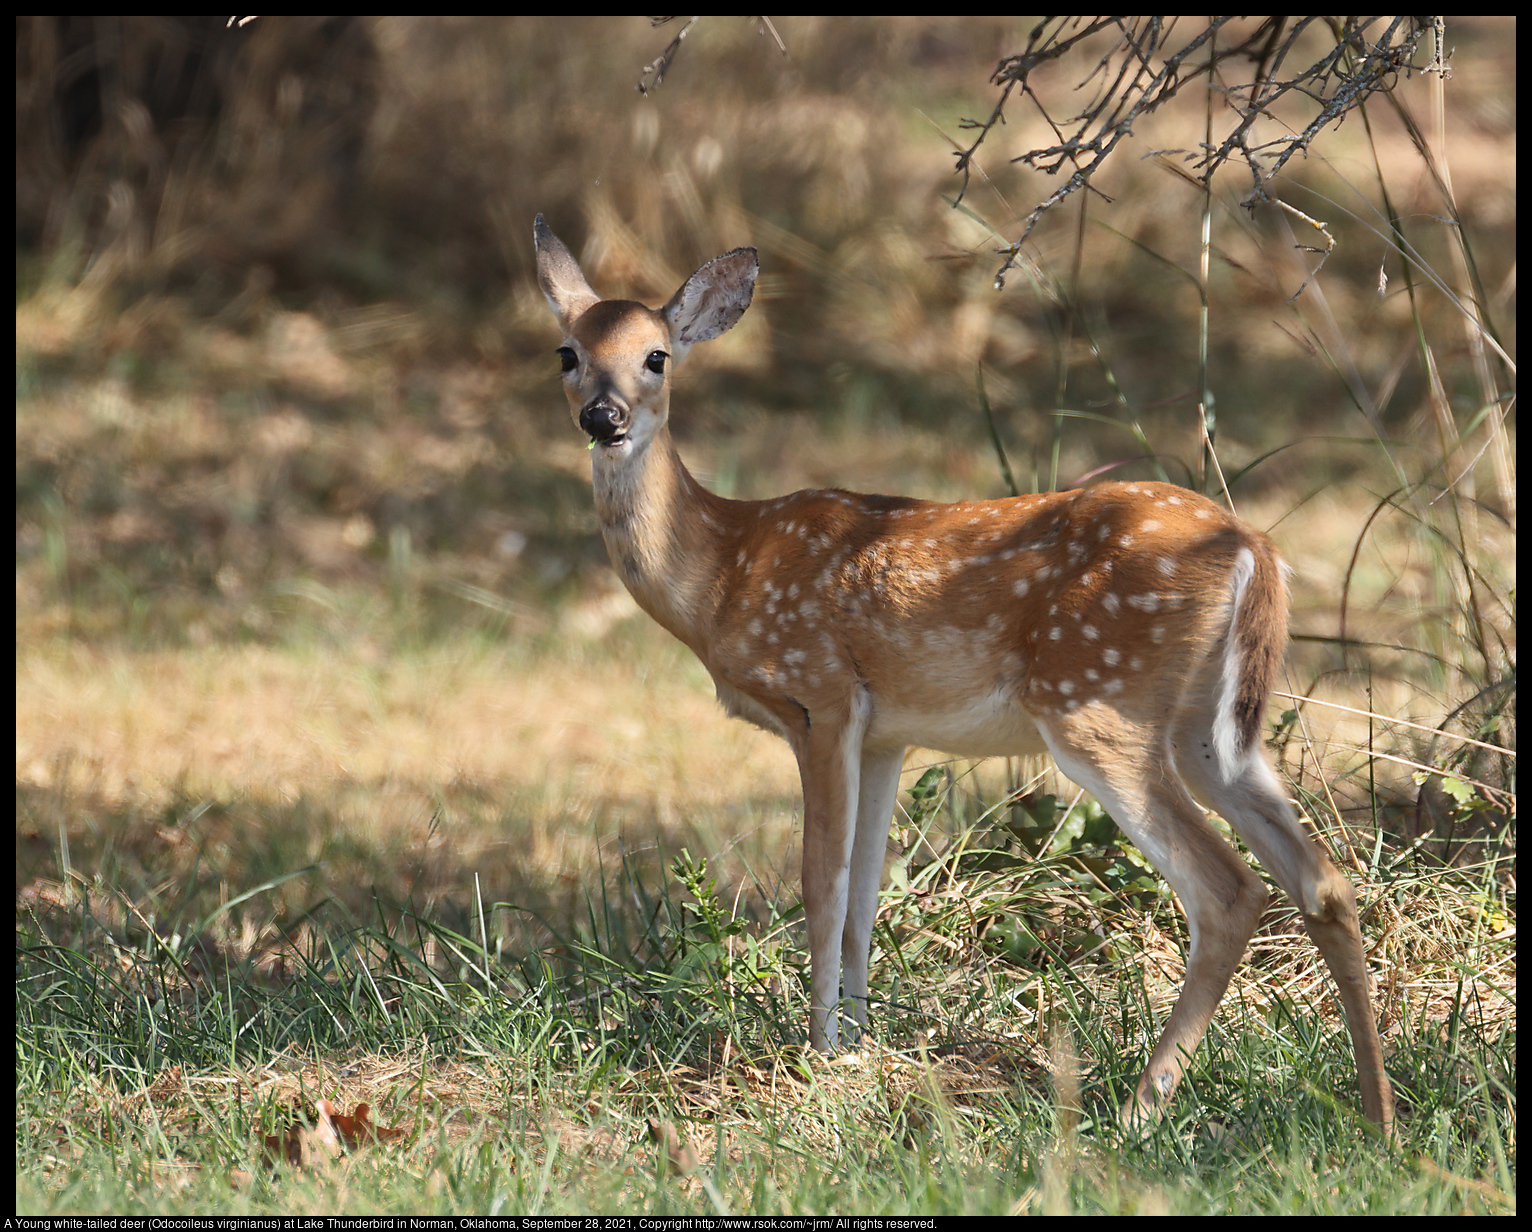 A Young white-tailed deer (Odocoileus virginianus) at Lake Thunderbird in Norman, Oklahoma, September 28, 2021